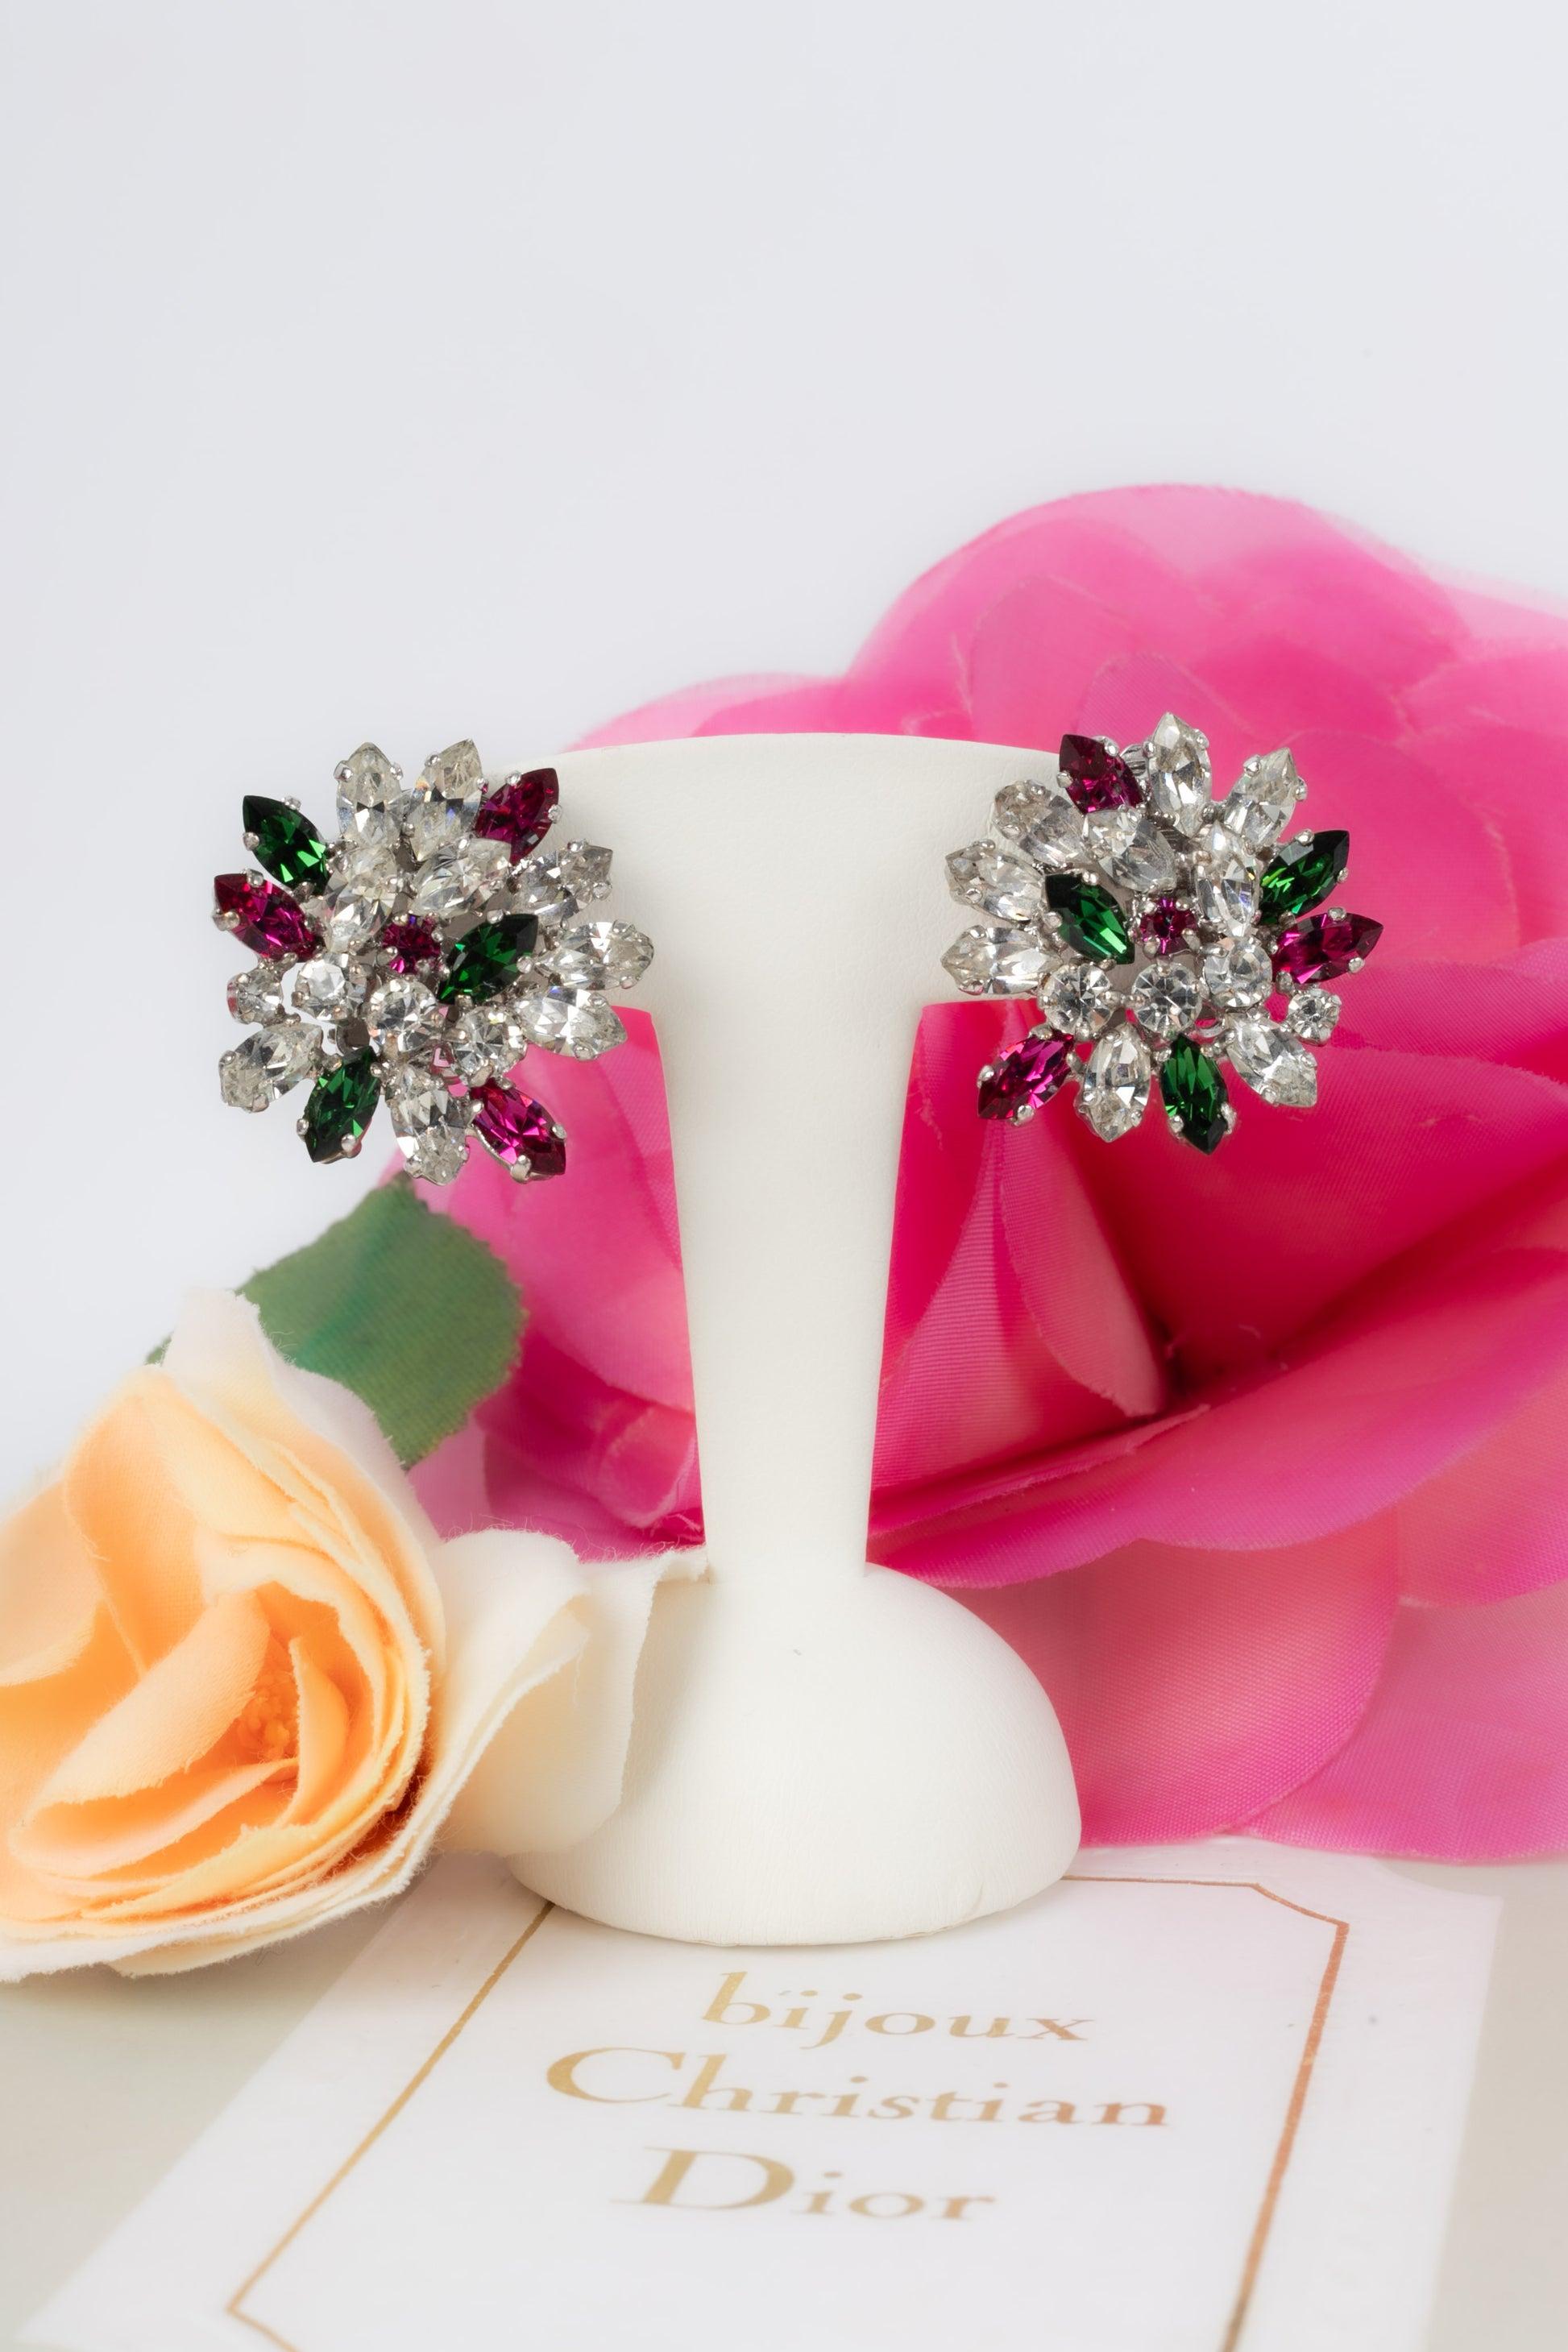 Dior - Silvery metal and rhinestone earrings. 1973 Collection.

Additional information:
Condition: Very good condition
Dimensions: Height: 2.5 cm

Seller Reference: BO205